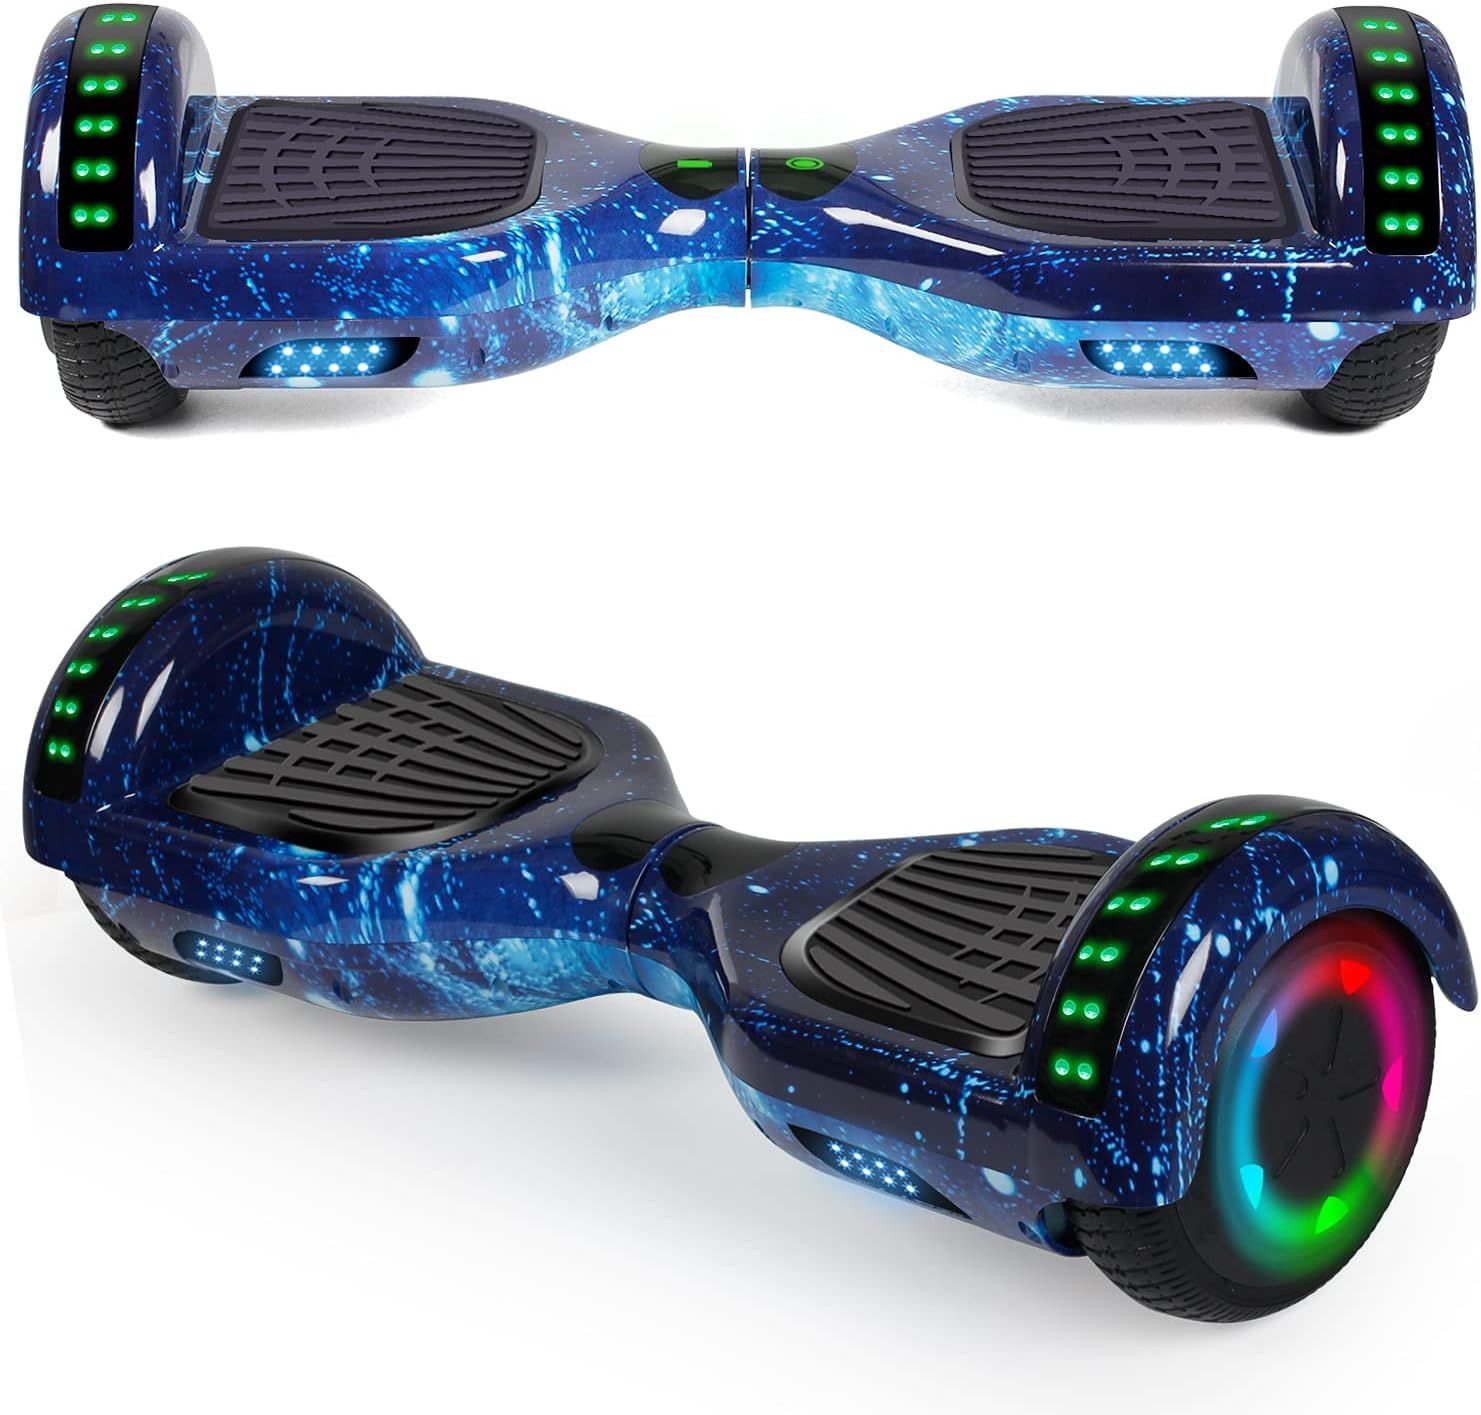 LIEAGLE Hoverboard, 6.5" Self Balancing Scooter Hover Board with Bluetooth Wheels LED Lights for ... | Amazon (US)